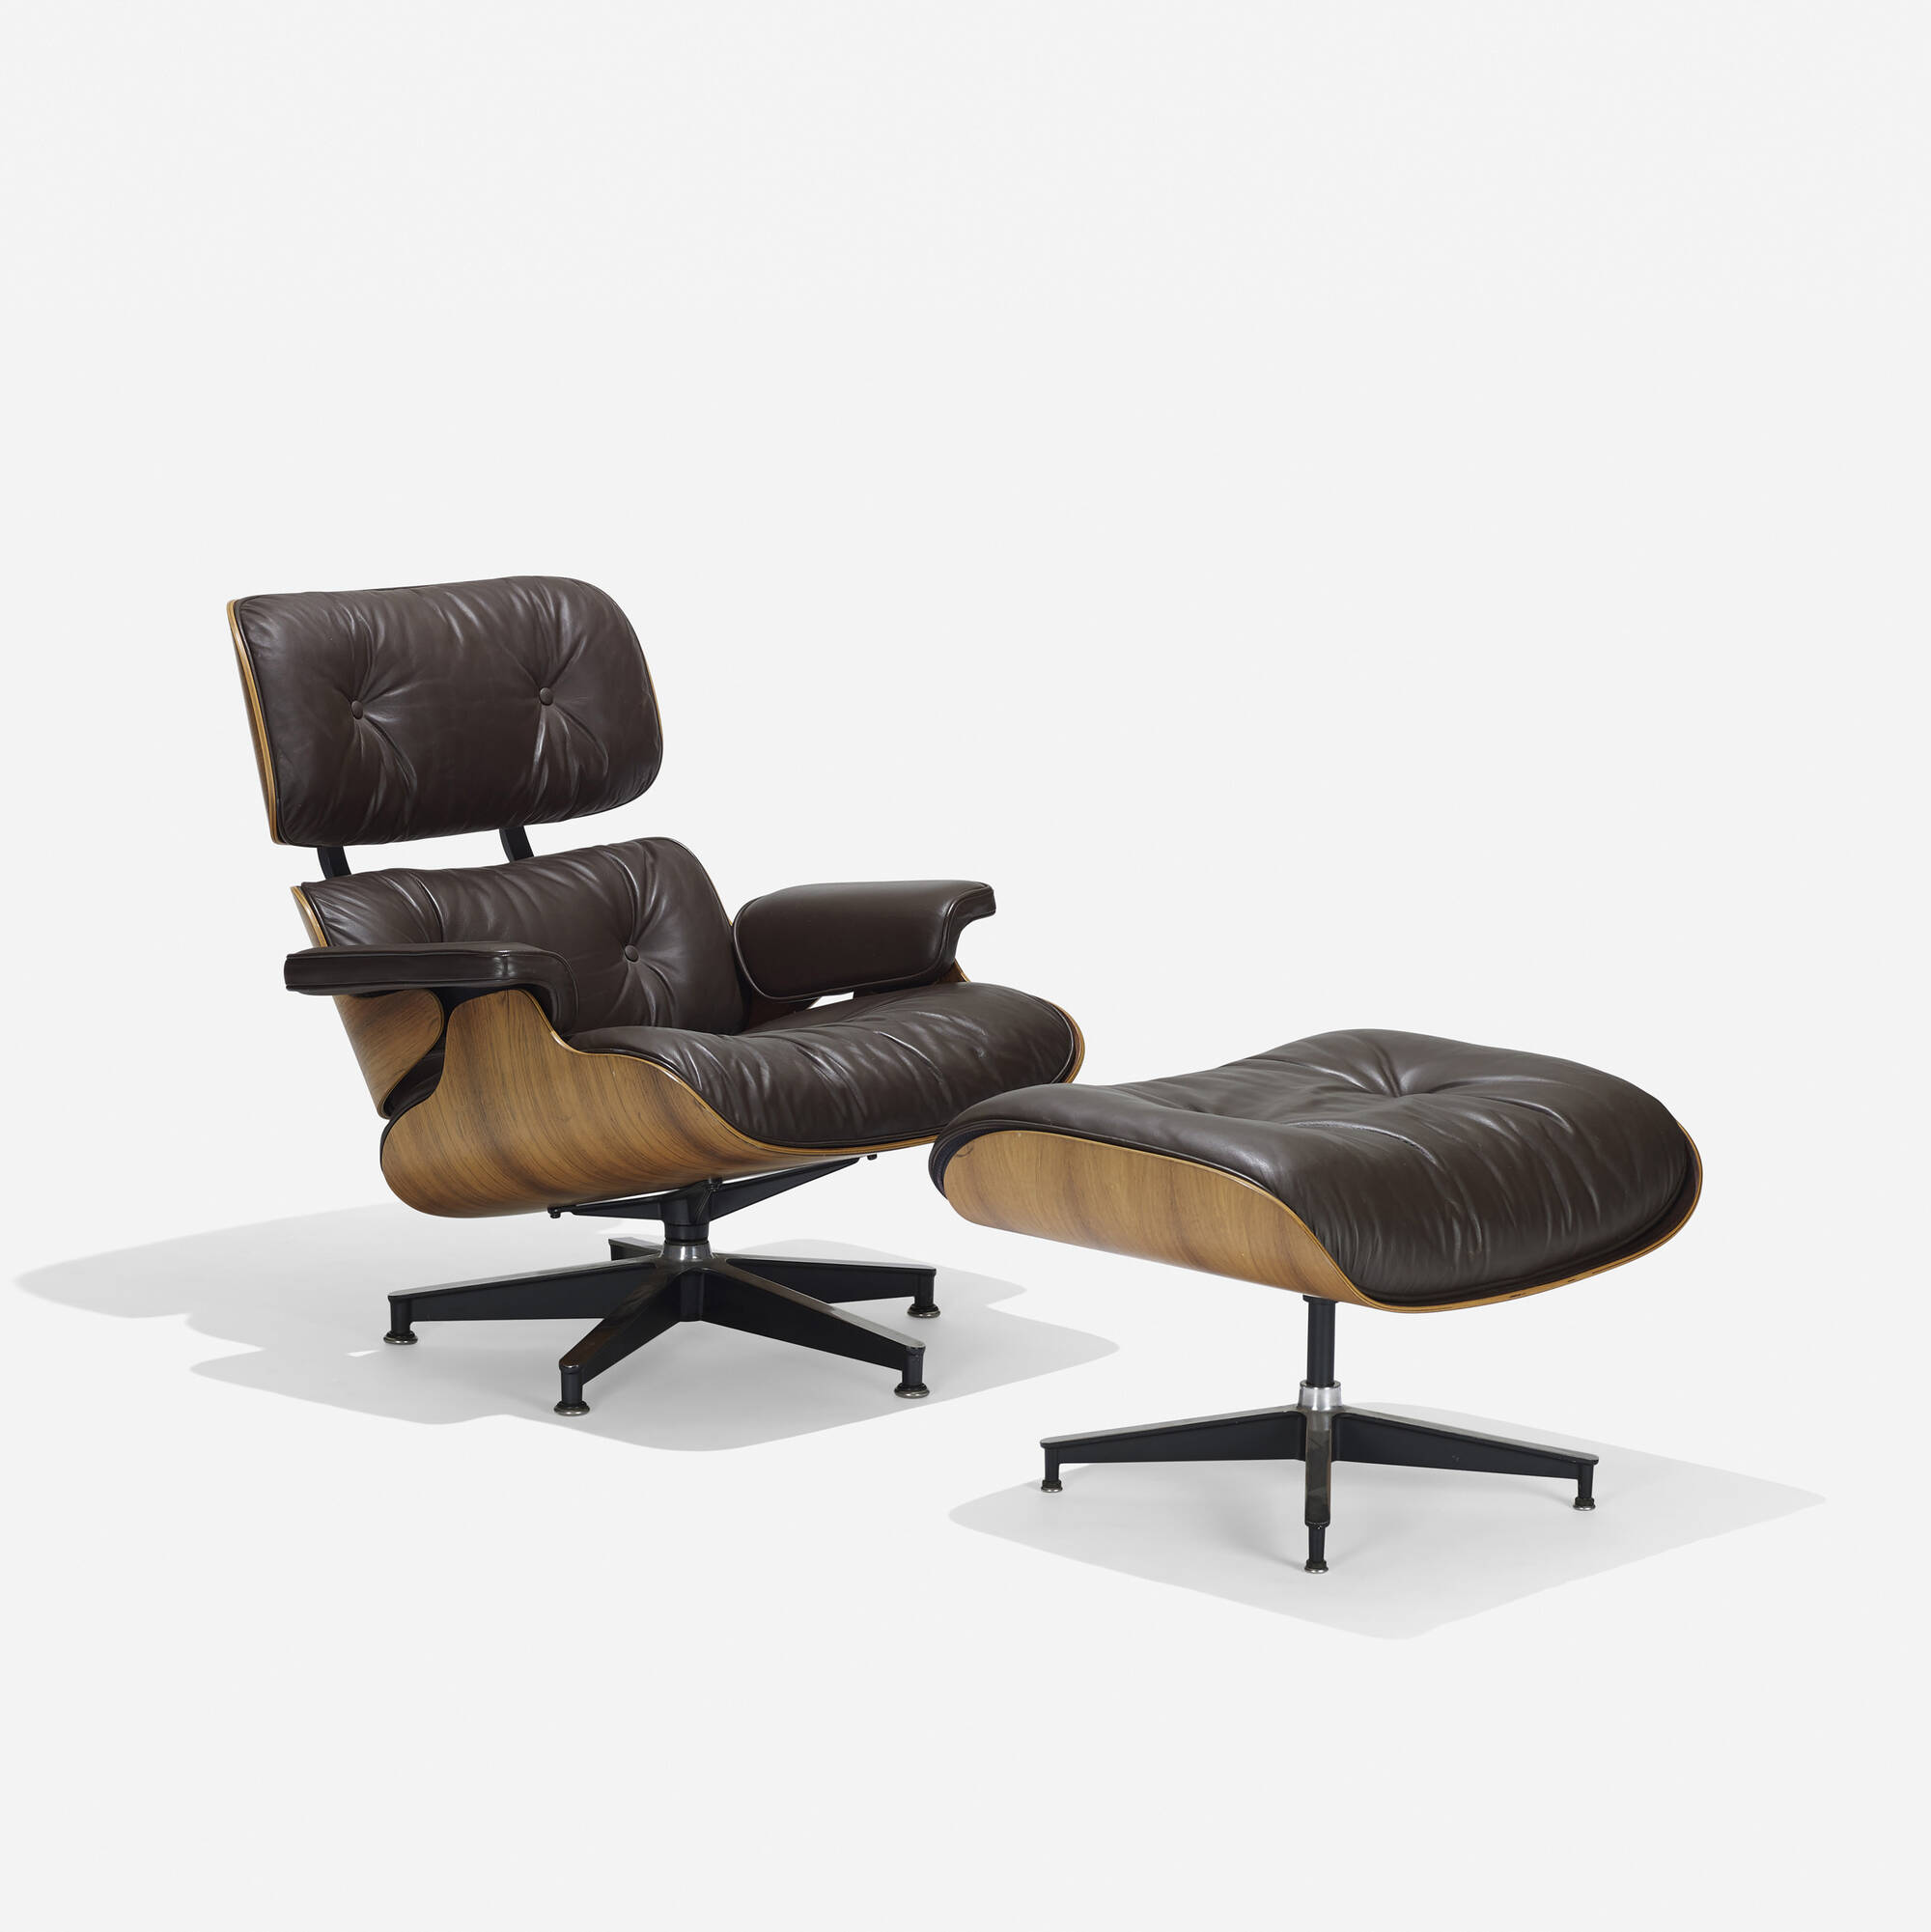 100: CHARLES AND RAY EAMES, 670 lounge chair and 671 ottoman